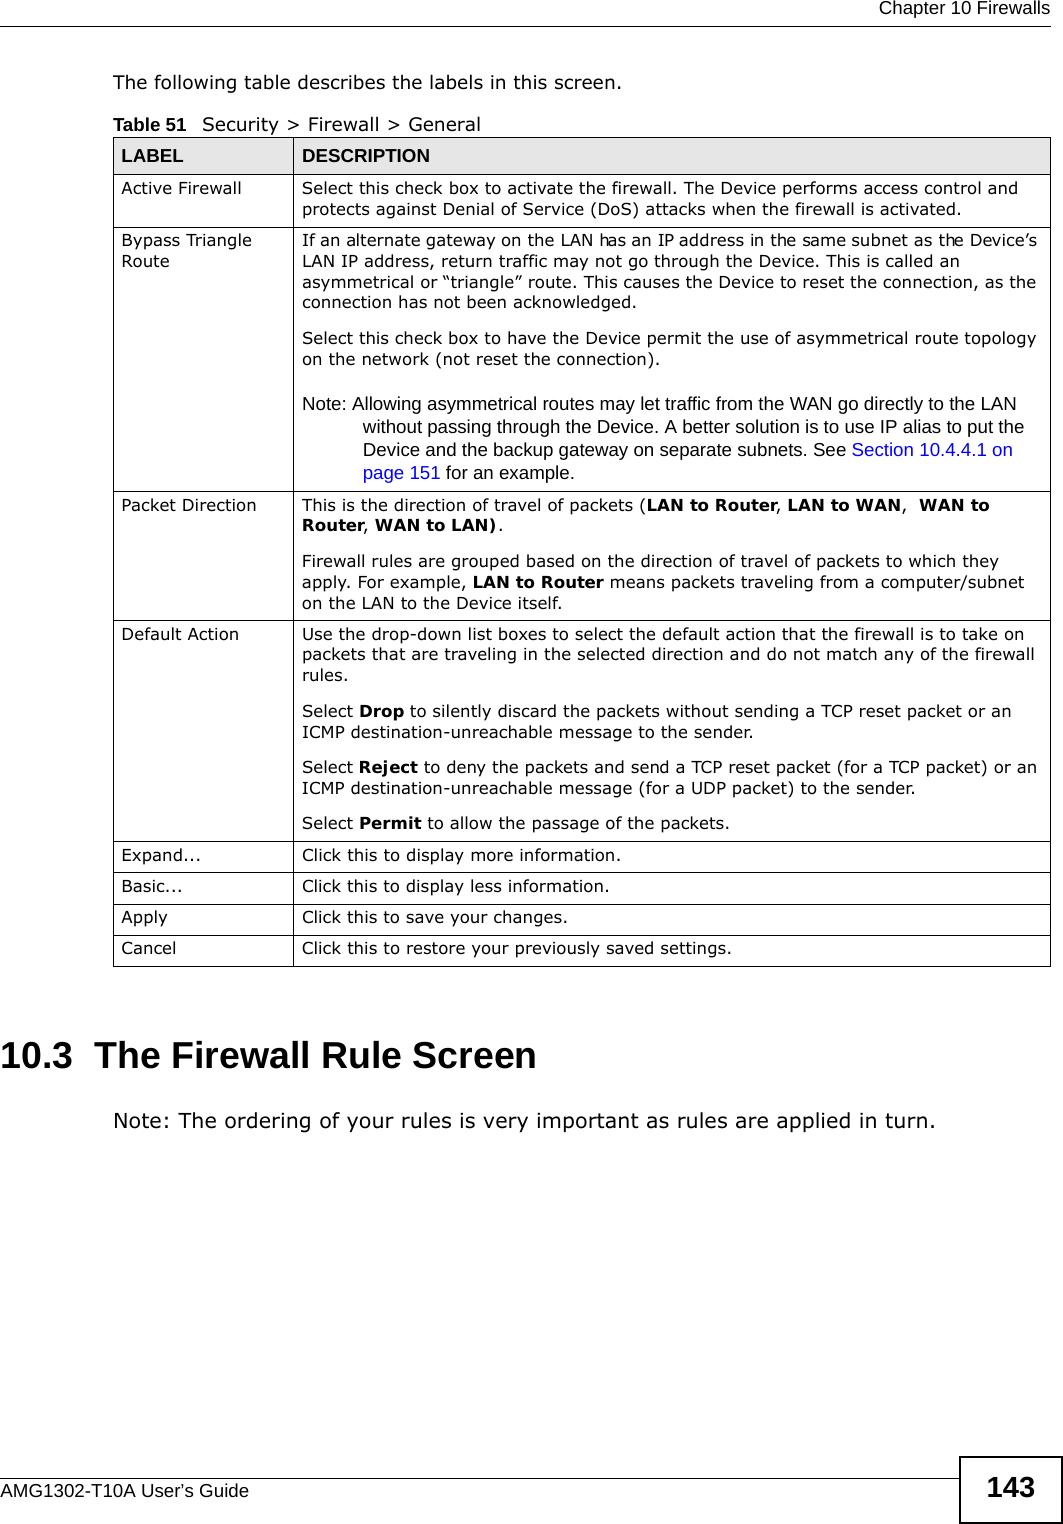  Chapter 10 FirewallsAMG1302-T10A User’s Guide 143The following table describes the labels in this screen. 10.3  The Firewall Rule ScreenNote: The ordering of your rules is very important as rules are applied in turn. Table 51   Security &gt; Firewall &gt; GeneralLABEL DESCRIPTIONActive Firewall Select this check box to activate the firewall. The Device performs access control and protects against Denial of Service (DoS) attacks when the firewall is activated.Bypass Triangle RouteIf an alternate gateway on the LAN has an IP address in the same subnet as the Device’s LAN IP address, return traffic may not go through the Device. This is called an asymmetrical or “triangle” route. This causes the Device to reset the connection, as the connection has not been acknowledged.Select this check box to have the Device permit the use of asymmetrical route topology on the network (not reset the connection). Note: Allowing asymmetrical routes may let traffic from the WAN go directly to the LAN without passing through the Device. A better solution is to use IP alias to put the Device and the backup gateway on separate subnets. See Section 10.4.4.1 on page 151 for an example. Packet Direction This is the direction of travel of packets (LAN to Router, LAN to WAN,  WAN to Router, WAN to LAN).Firewall rules are grouped based on the direction of travel of packets to which they apply. For example, LAN to Router means packets traveling from a computer/subnet on the LAN to the Device itself. Default Action Use the drop-down list boxes to select the default action that the firewall is to take on packets that are traveling in the selected direction and do not match any of the firewall rules. Select Drop to silently discard the packets without sending a TCP reset packet or an ICMP destination-unreachable message to the sender.Select Reject to deny the packets and send a TCP reset packet (for a TCP packet) or an ICMP destination-unreachable message (for a UDP packet) to the sender.Select Permit to allow the passage of the packets.Expand... Click this to display more information.Basic... Click this to display less information.Apply Click this to save your changes.Cancel Click this to restore your previously saved settings.